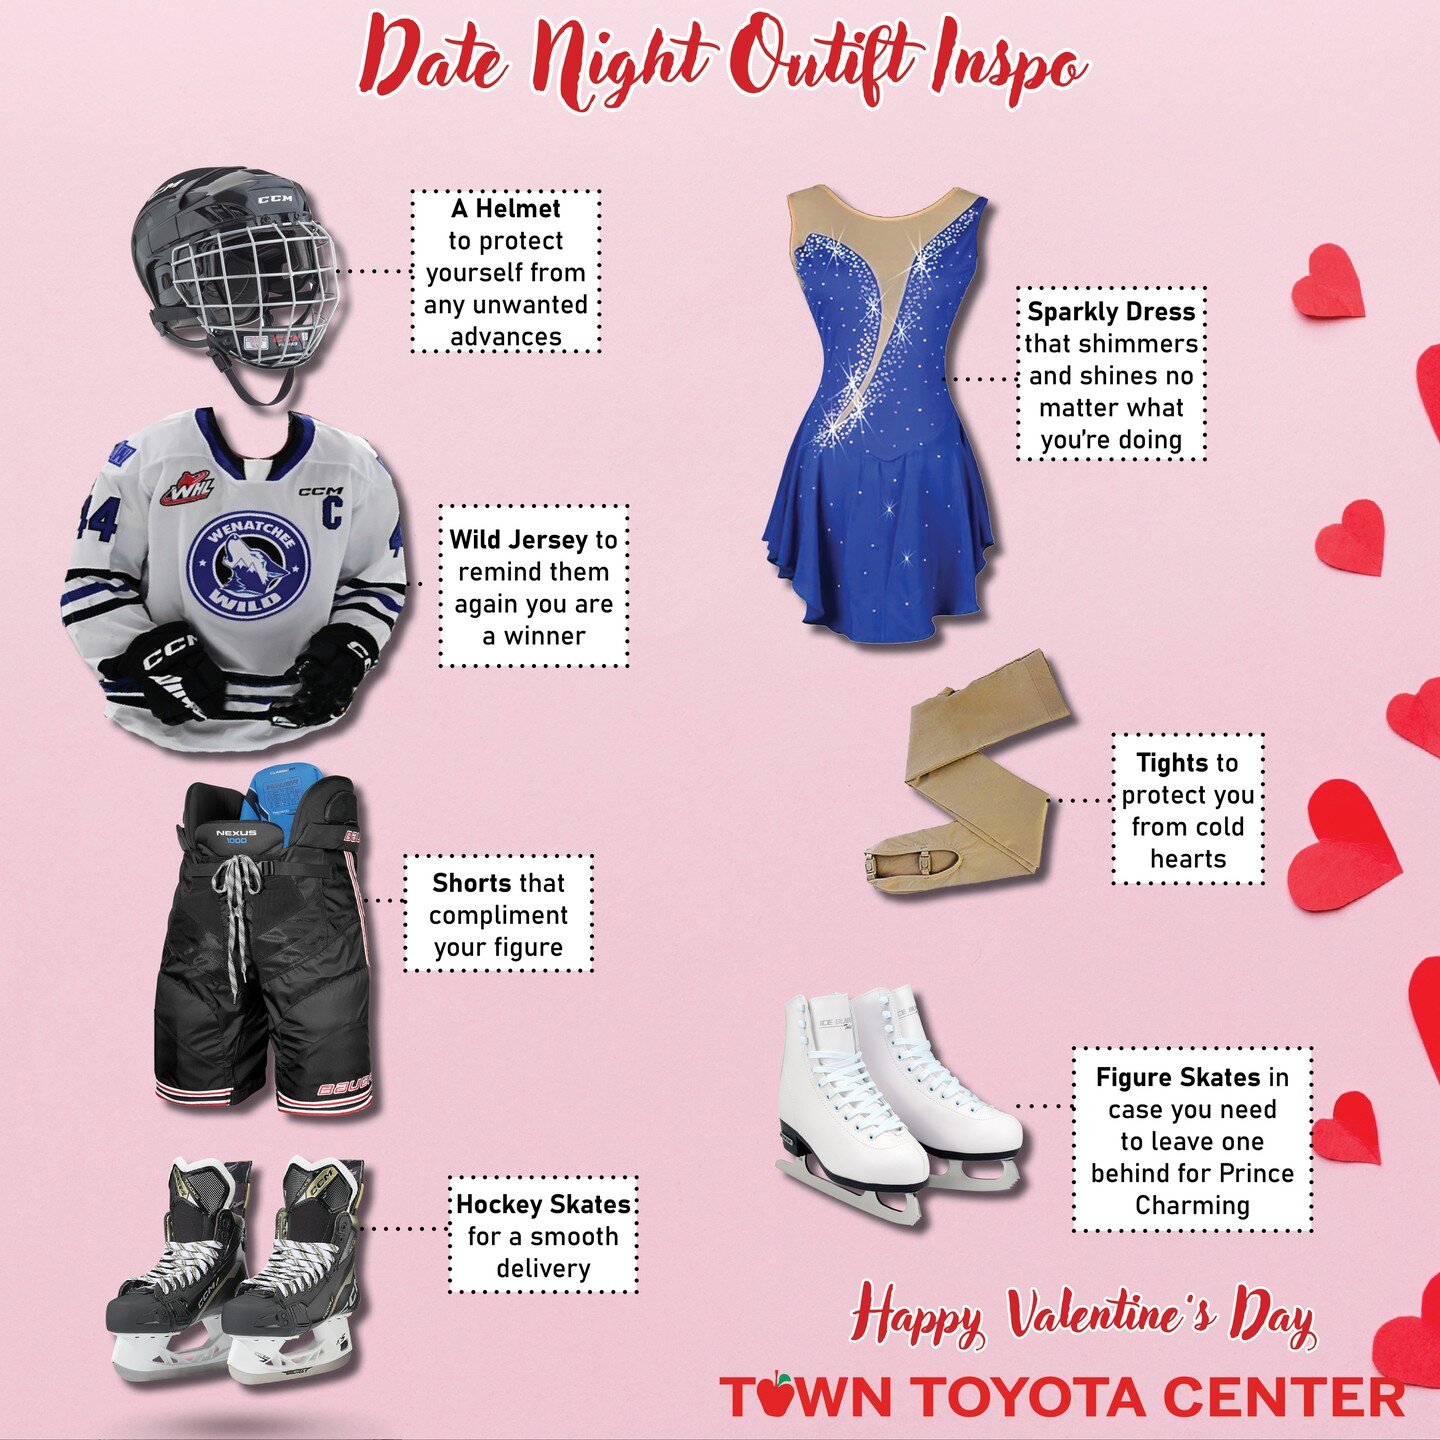 Free fashion advice for your date night outfit if you're looking for inspo ❤️

Don't forget to bring your date to our Valentine's Public Skate tonight from 5:30-7:30 in the Weinstein Beverage Community Rink! 

Happy Valentine's Day 🥰
#Wenatchee #val